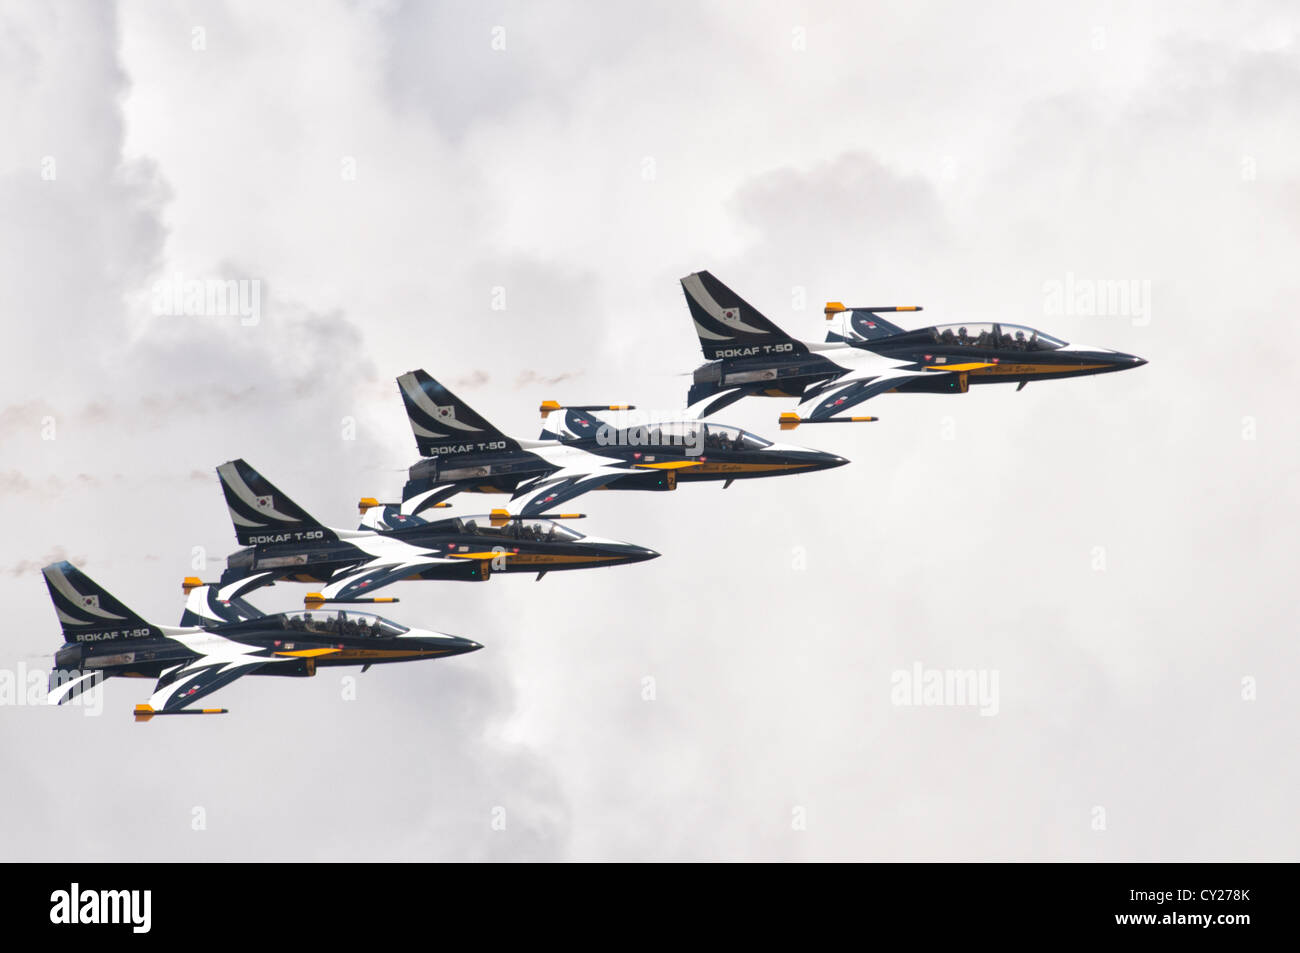 The Black Eagles display team from South Korea perform an amazing and dynamic display of precision aerobatics in their T-50 Jets Stock Photo